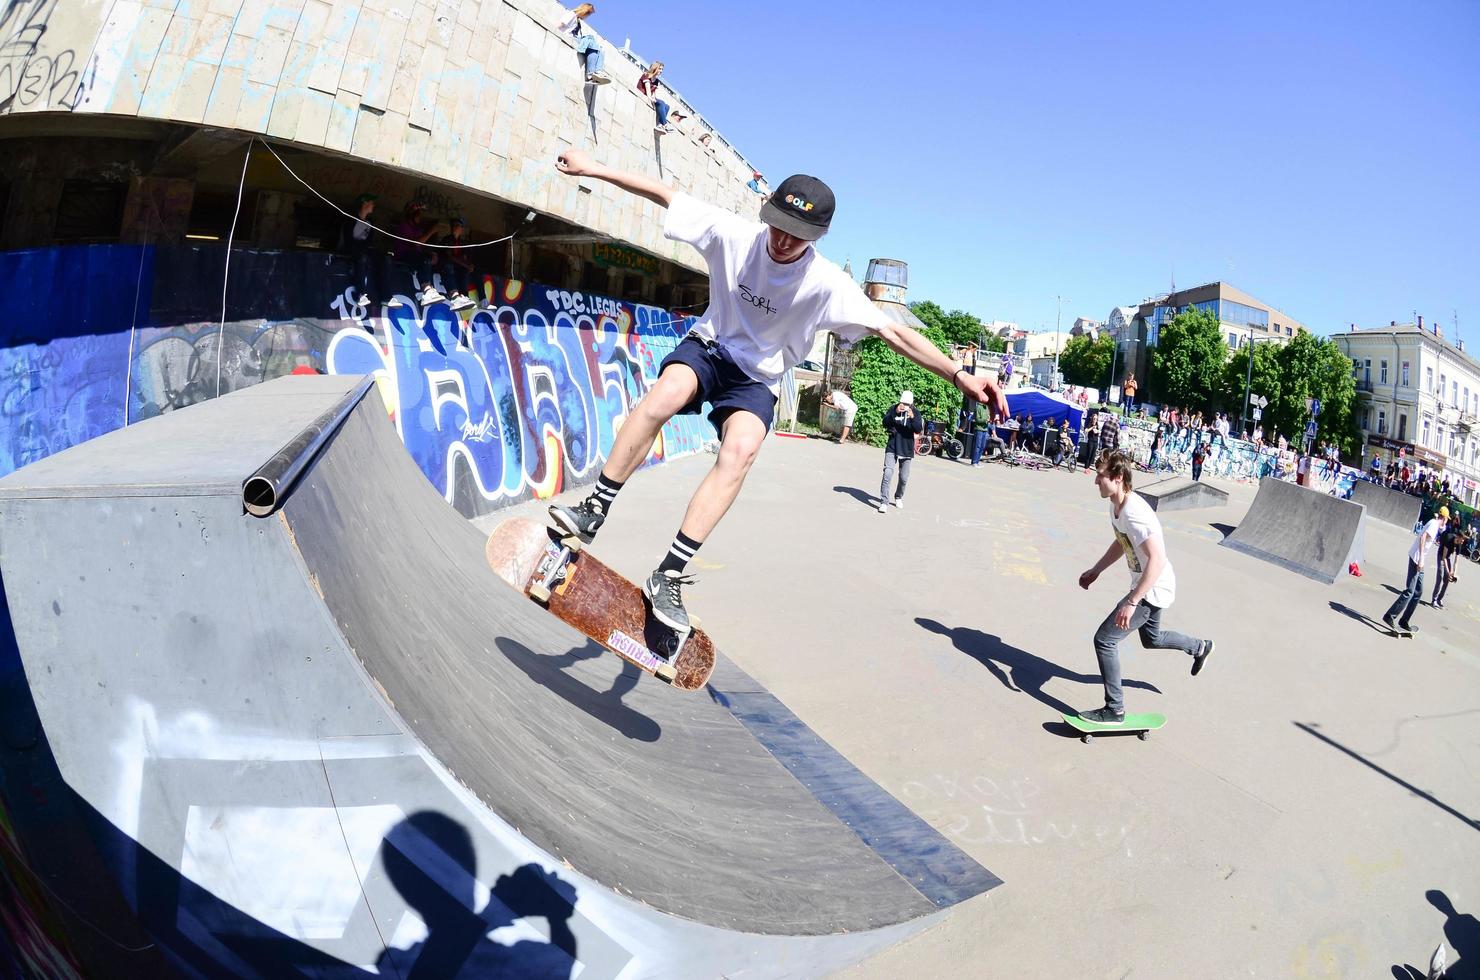 KHARKOV. UKRAINE - MAY 2, 2022 Skateboarding contest in outdoors skate park during the annual festival of street cultures photo